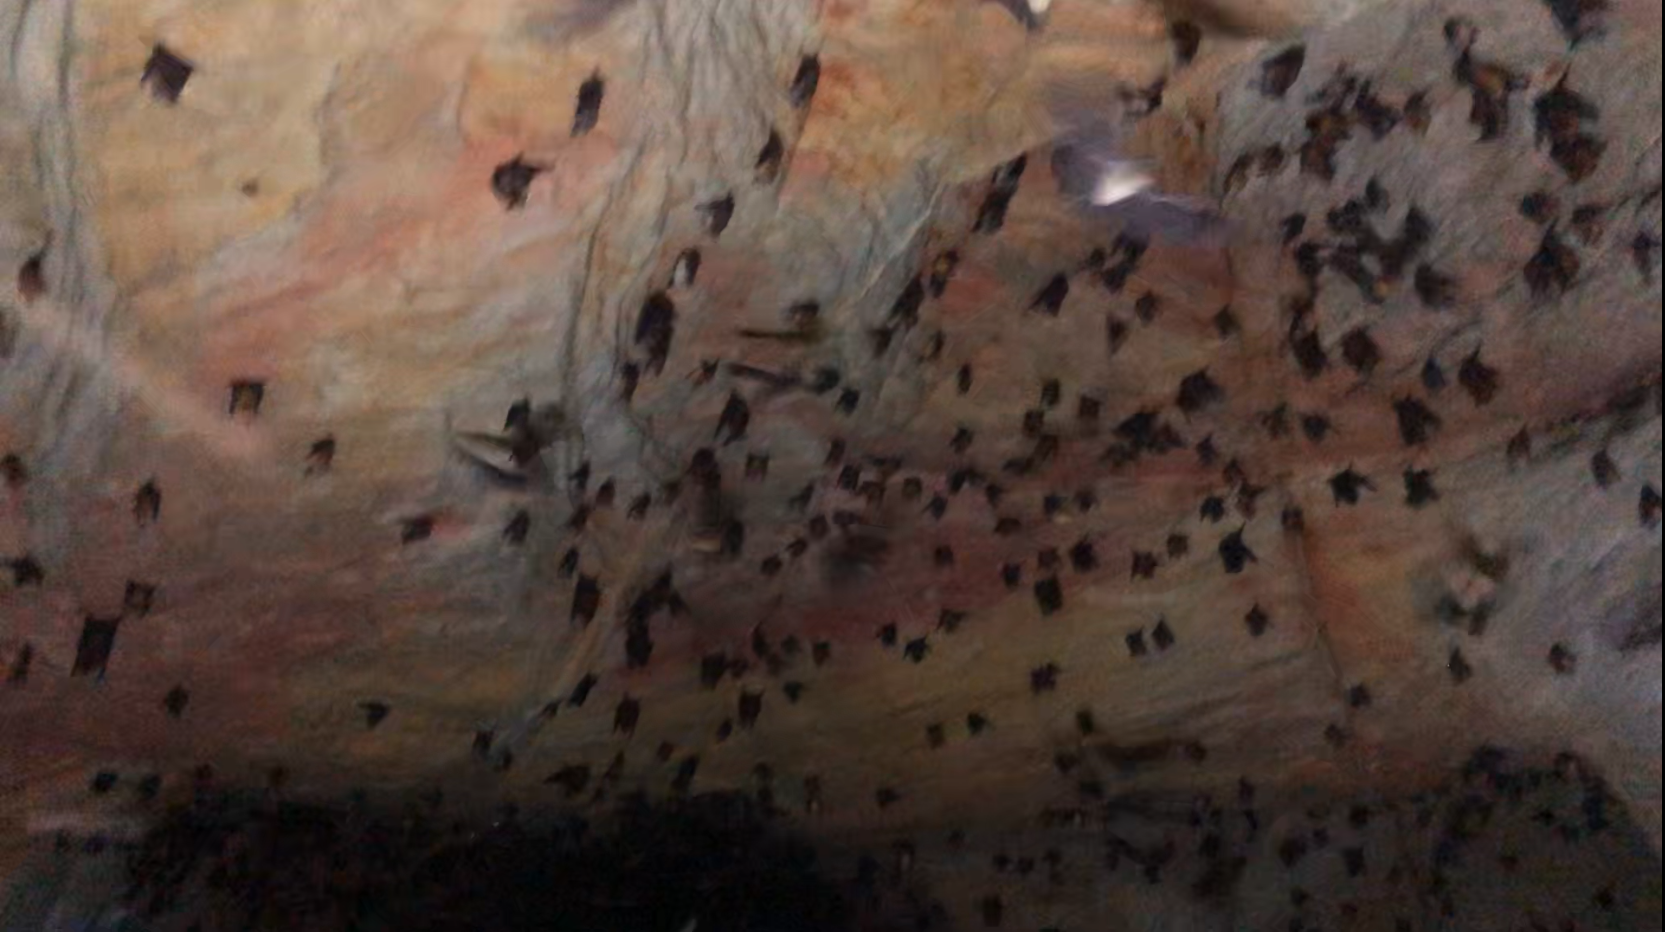 A Swarm of Bats in Ogbunike Cave